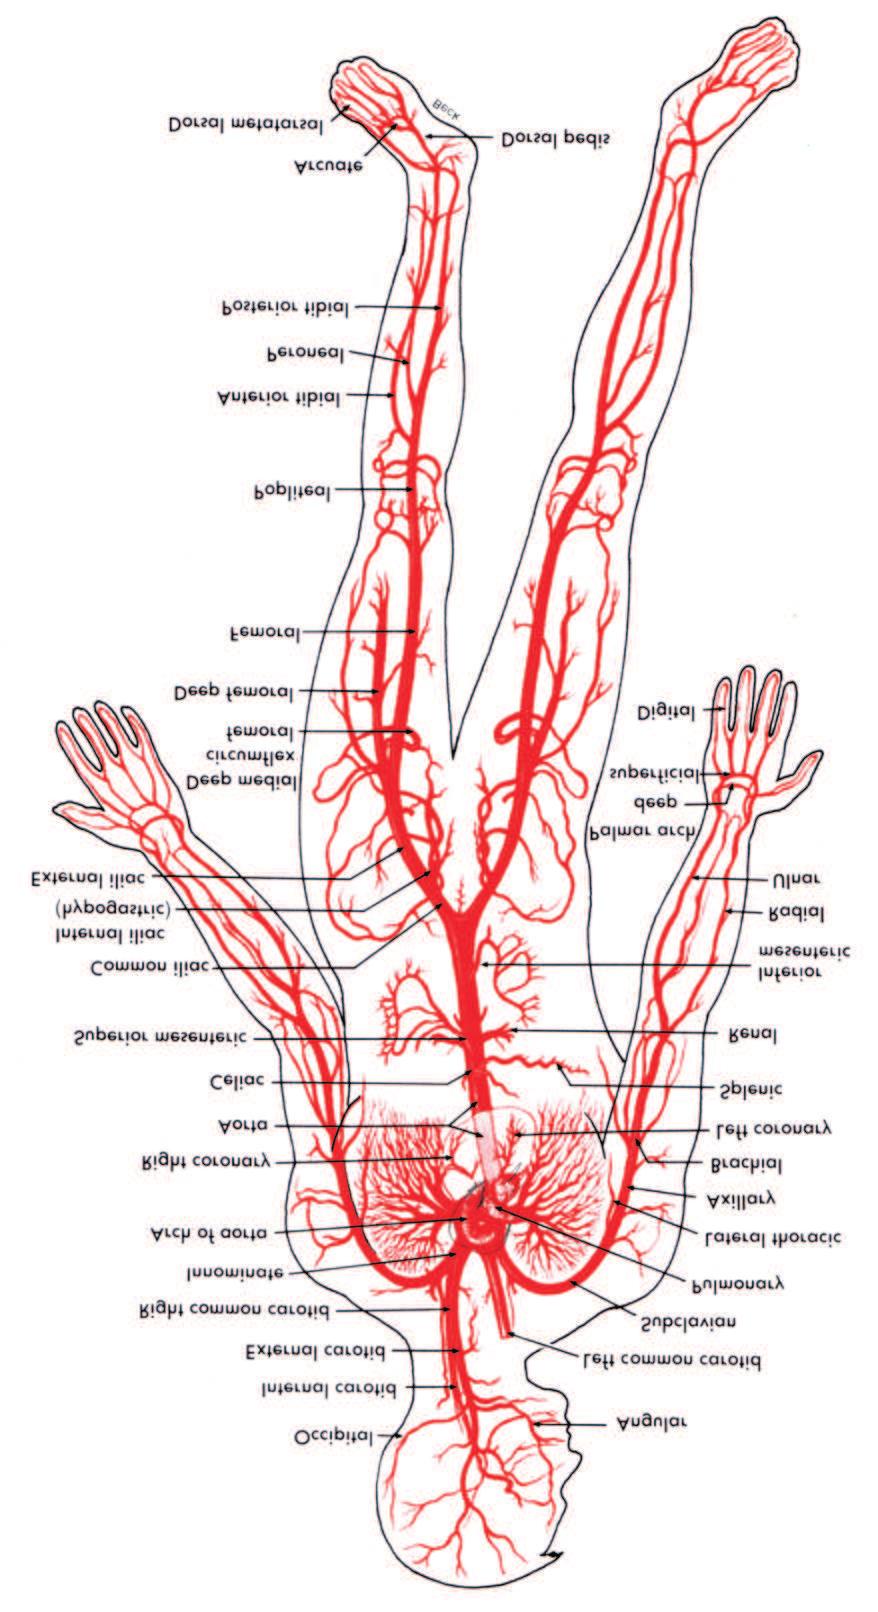 Arteries I Arterial system consists of a branching network of elastic conduits and high resistance terminals Arteries subdivided into elastic and muscolar Elastic arteries: closer to heart with large